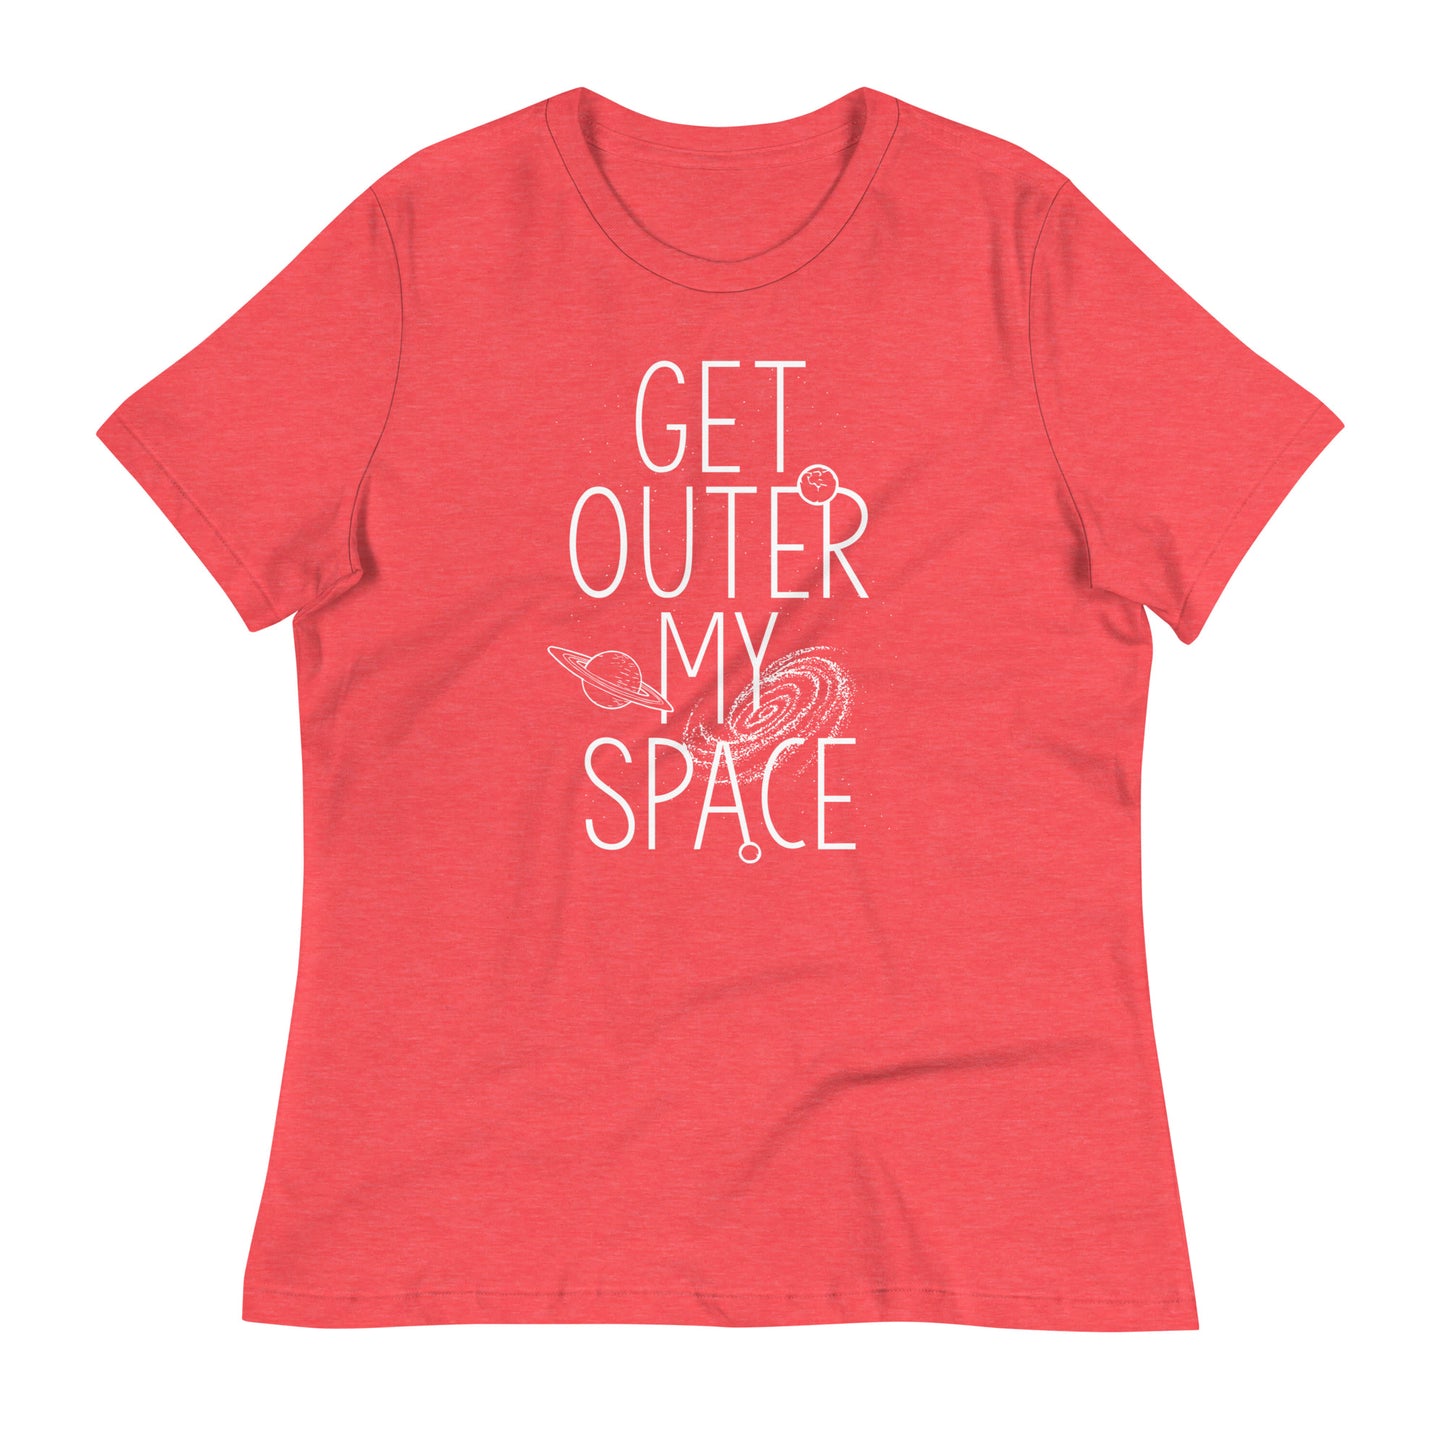 Get Outer My Space Women's Signature Tee